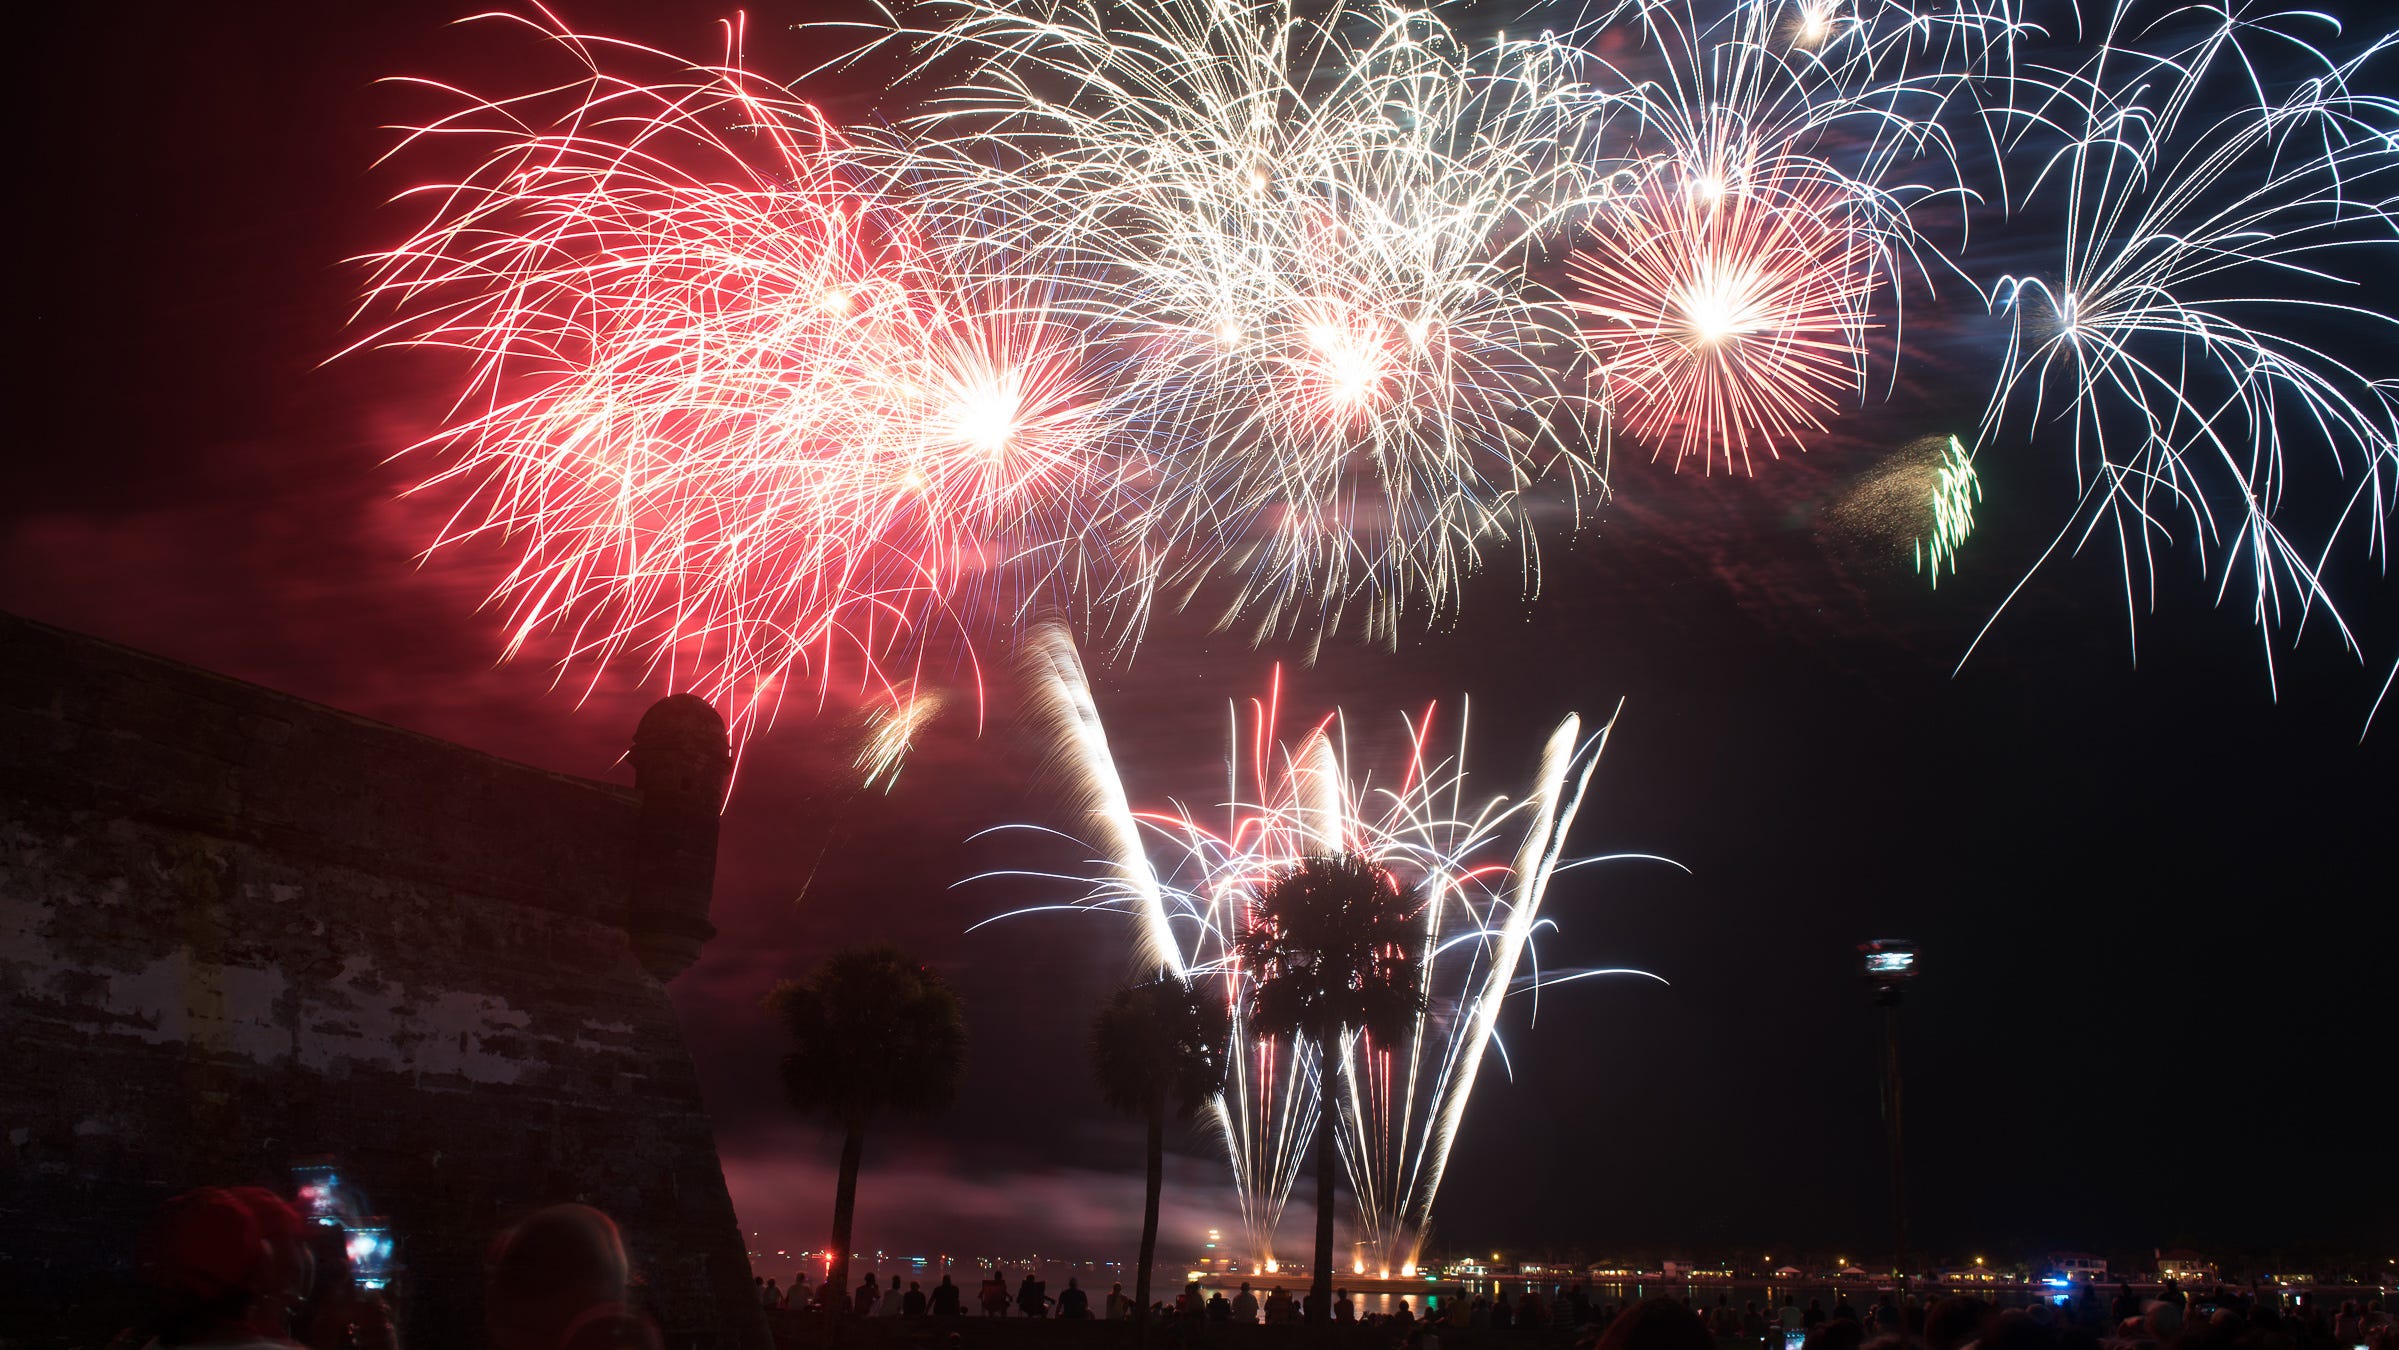 St. Augustine's fireworks return July 4th. Here's where to see them